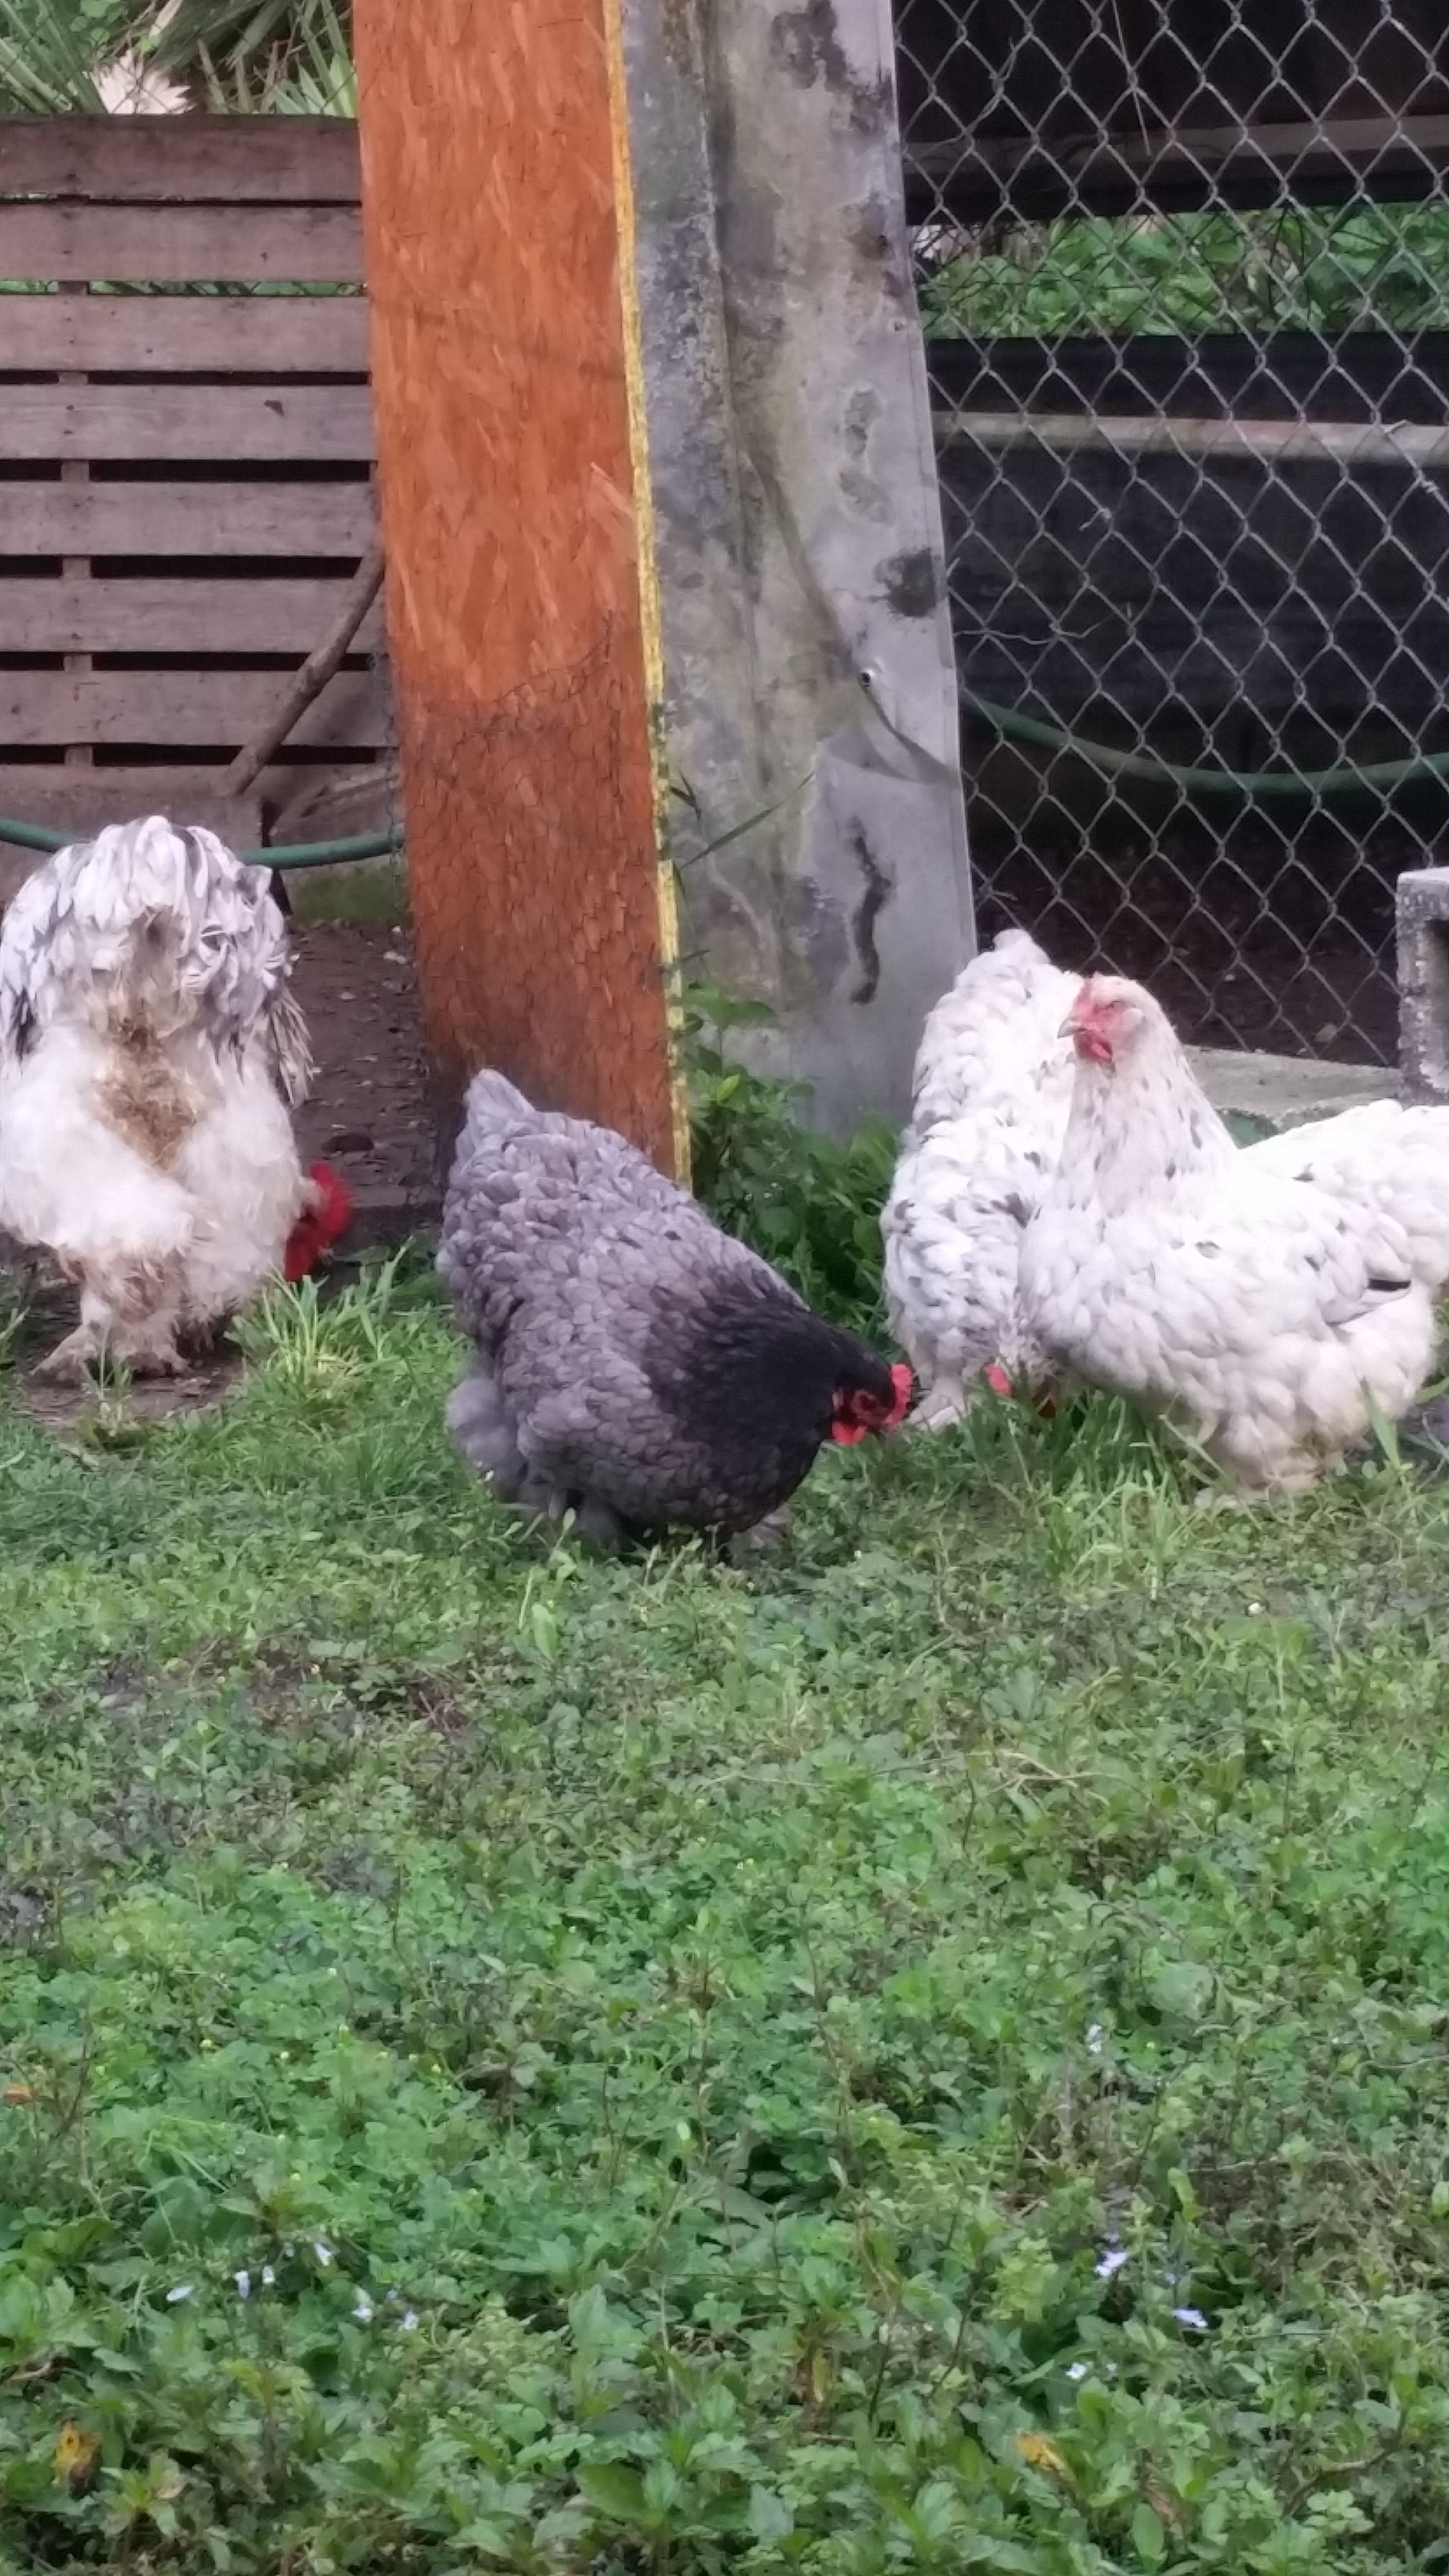 Free ranging the cochins